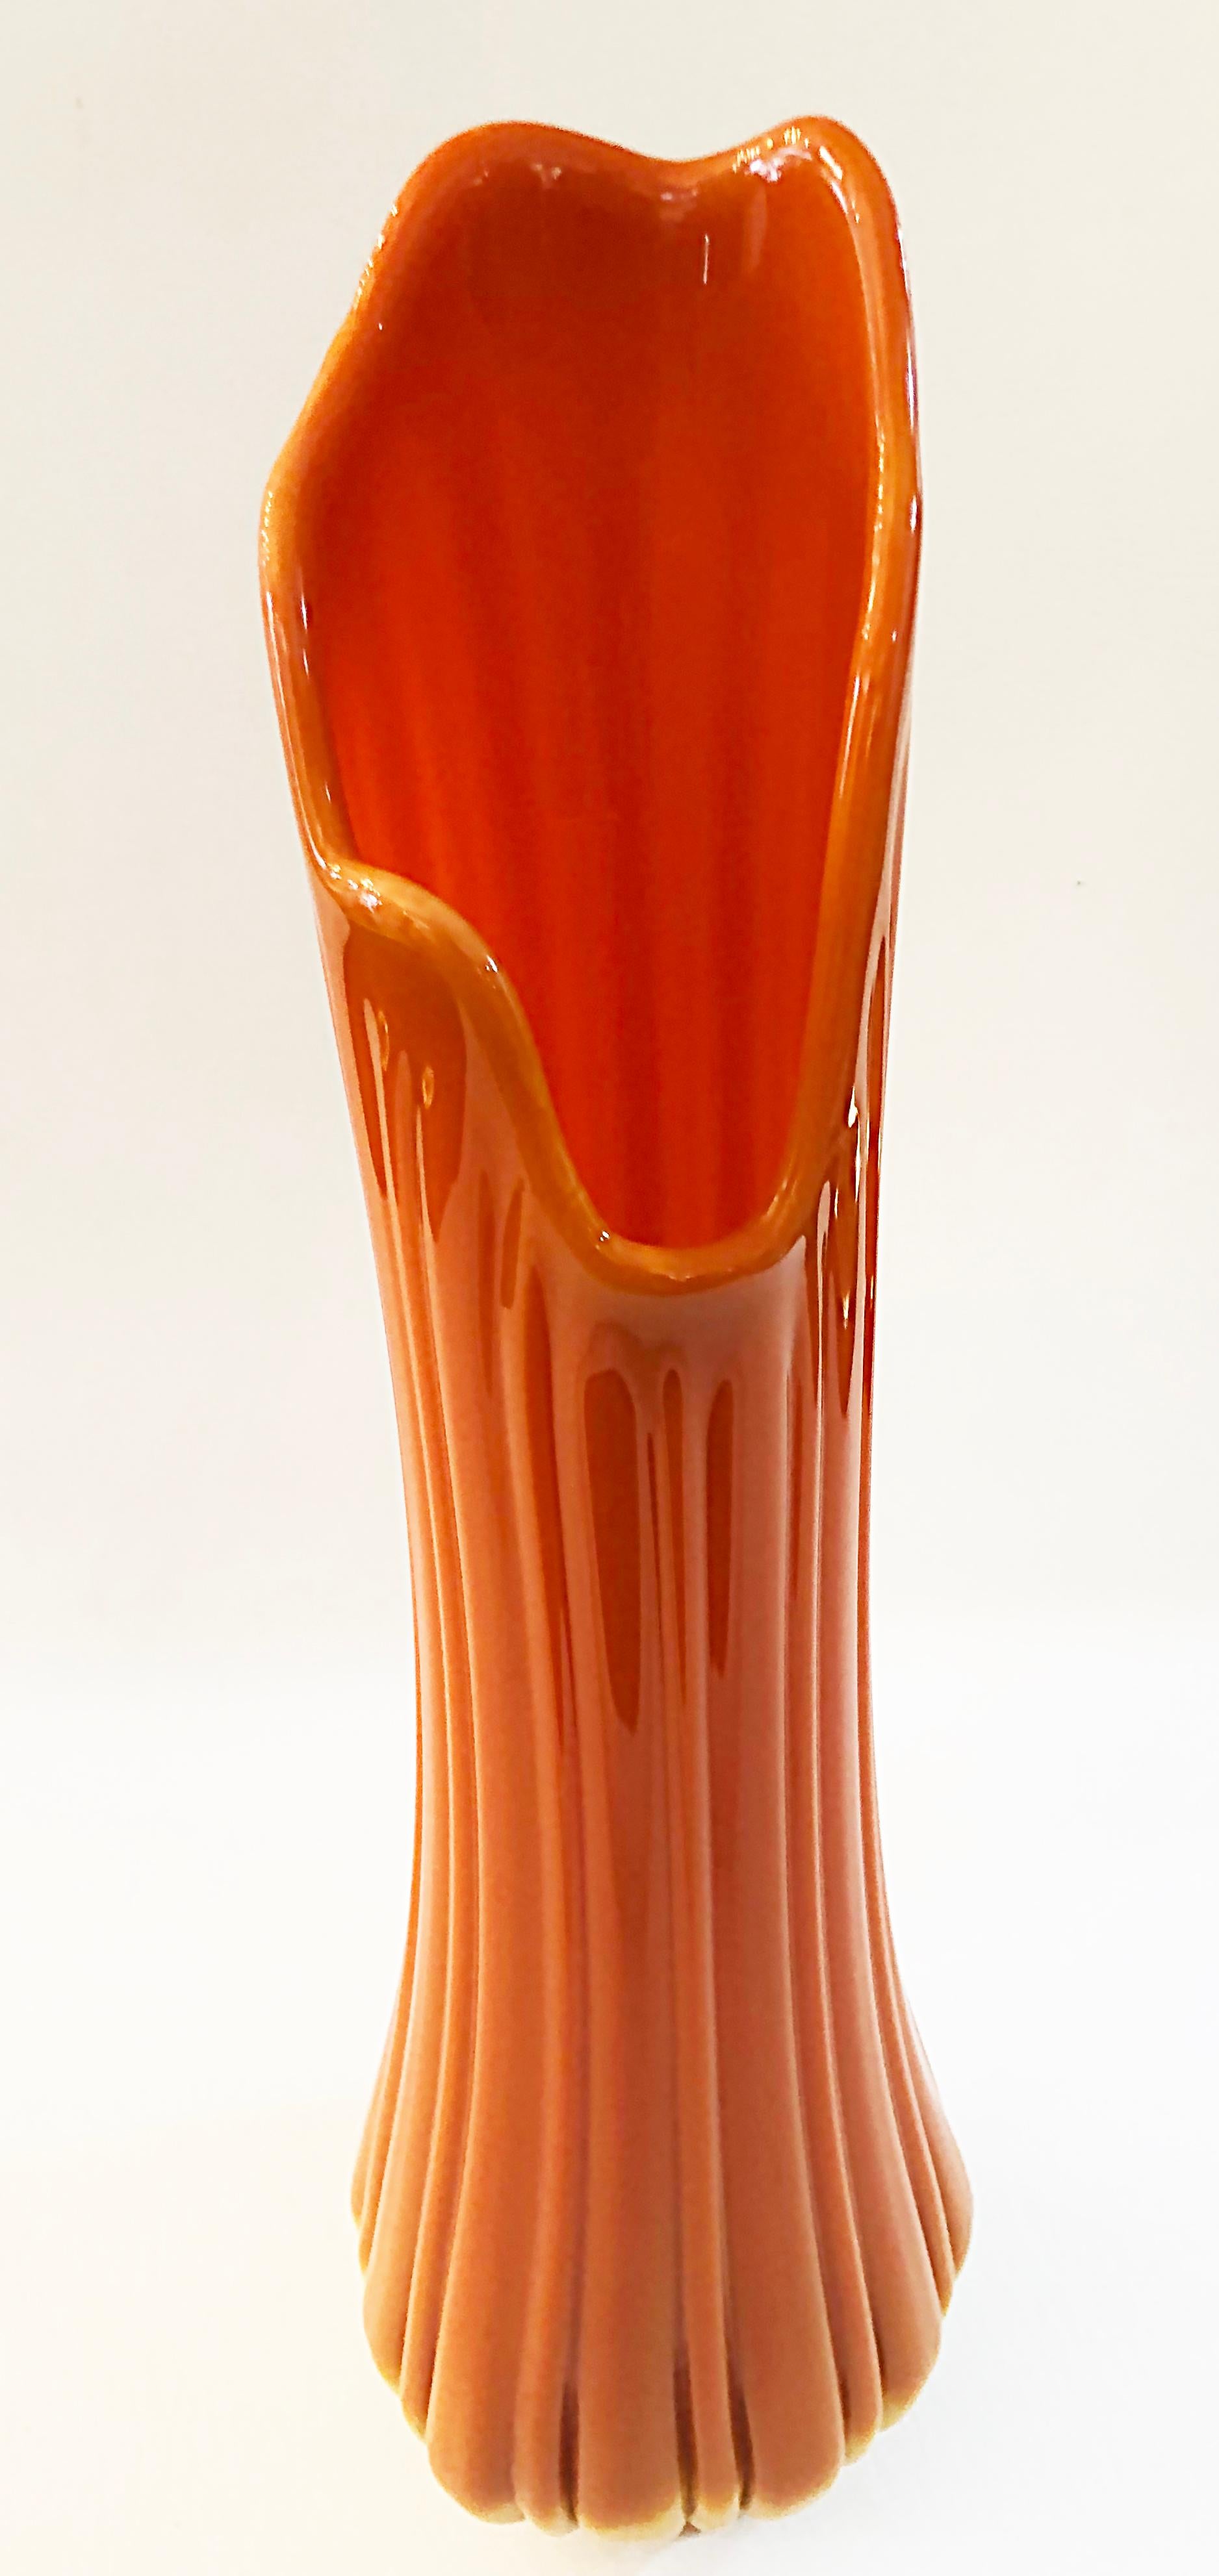 American Viking Swung Orange Glass Vase Attributed to L.E. Smith, 1960s